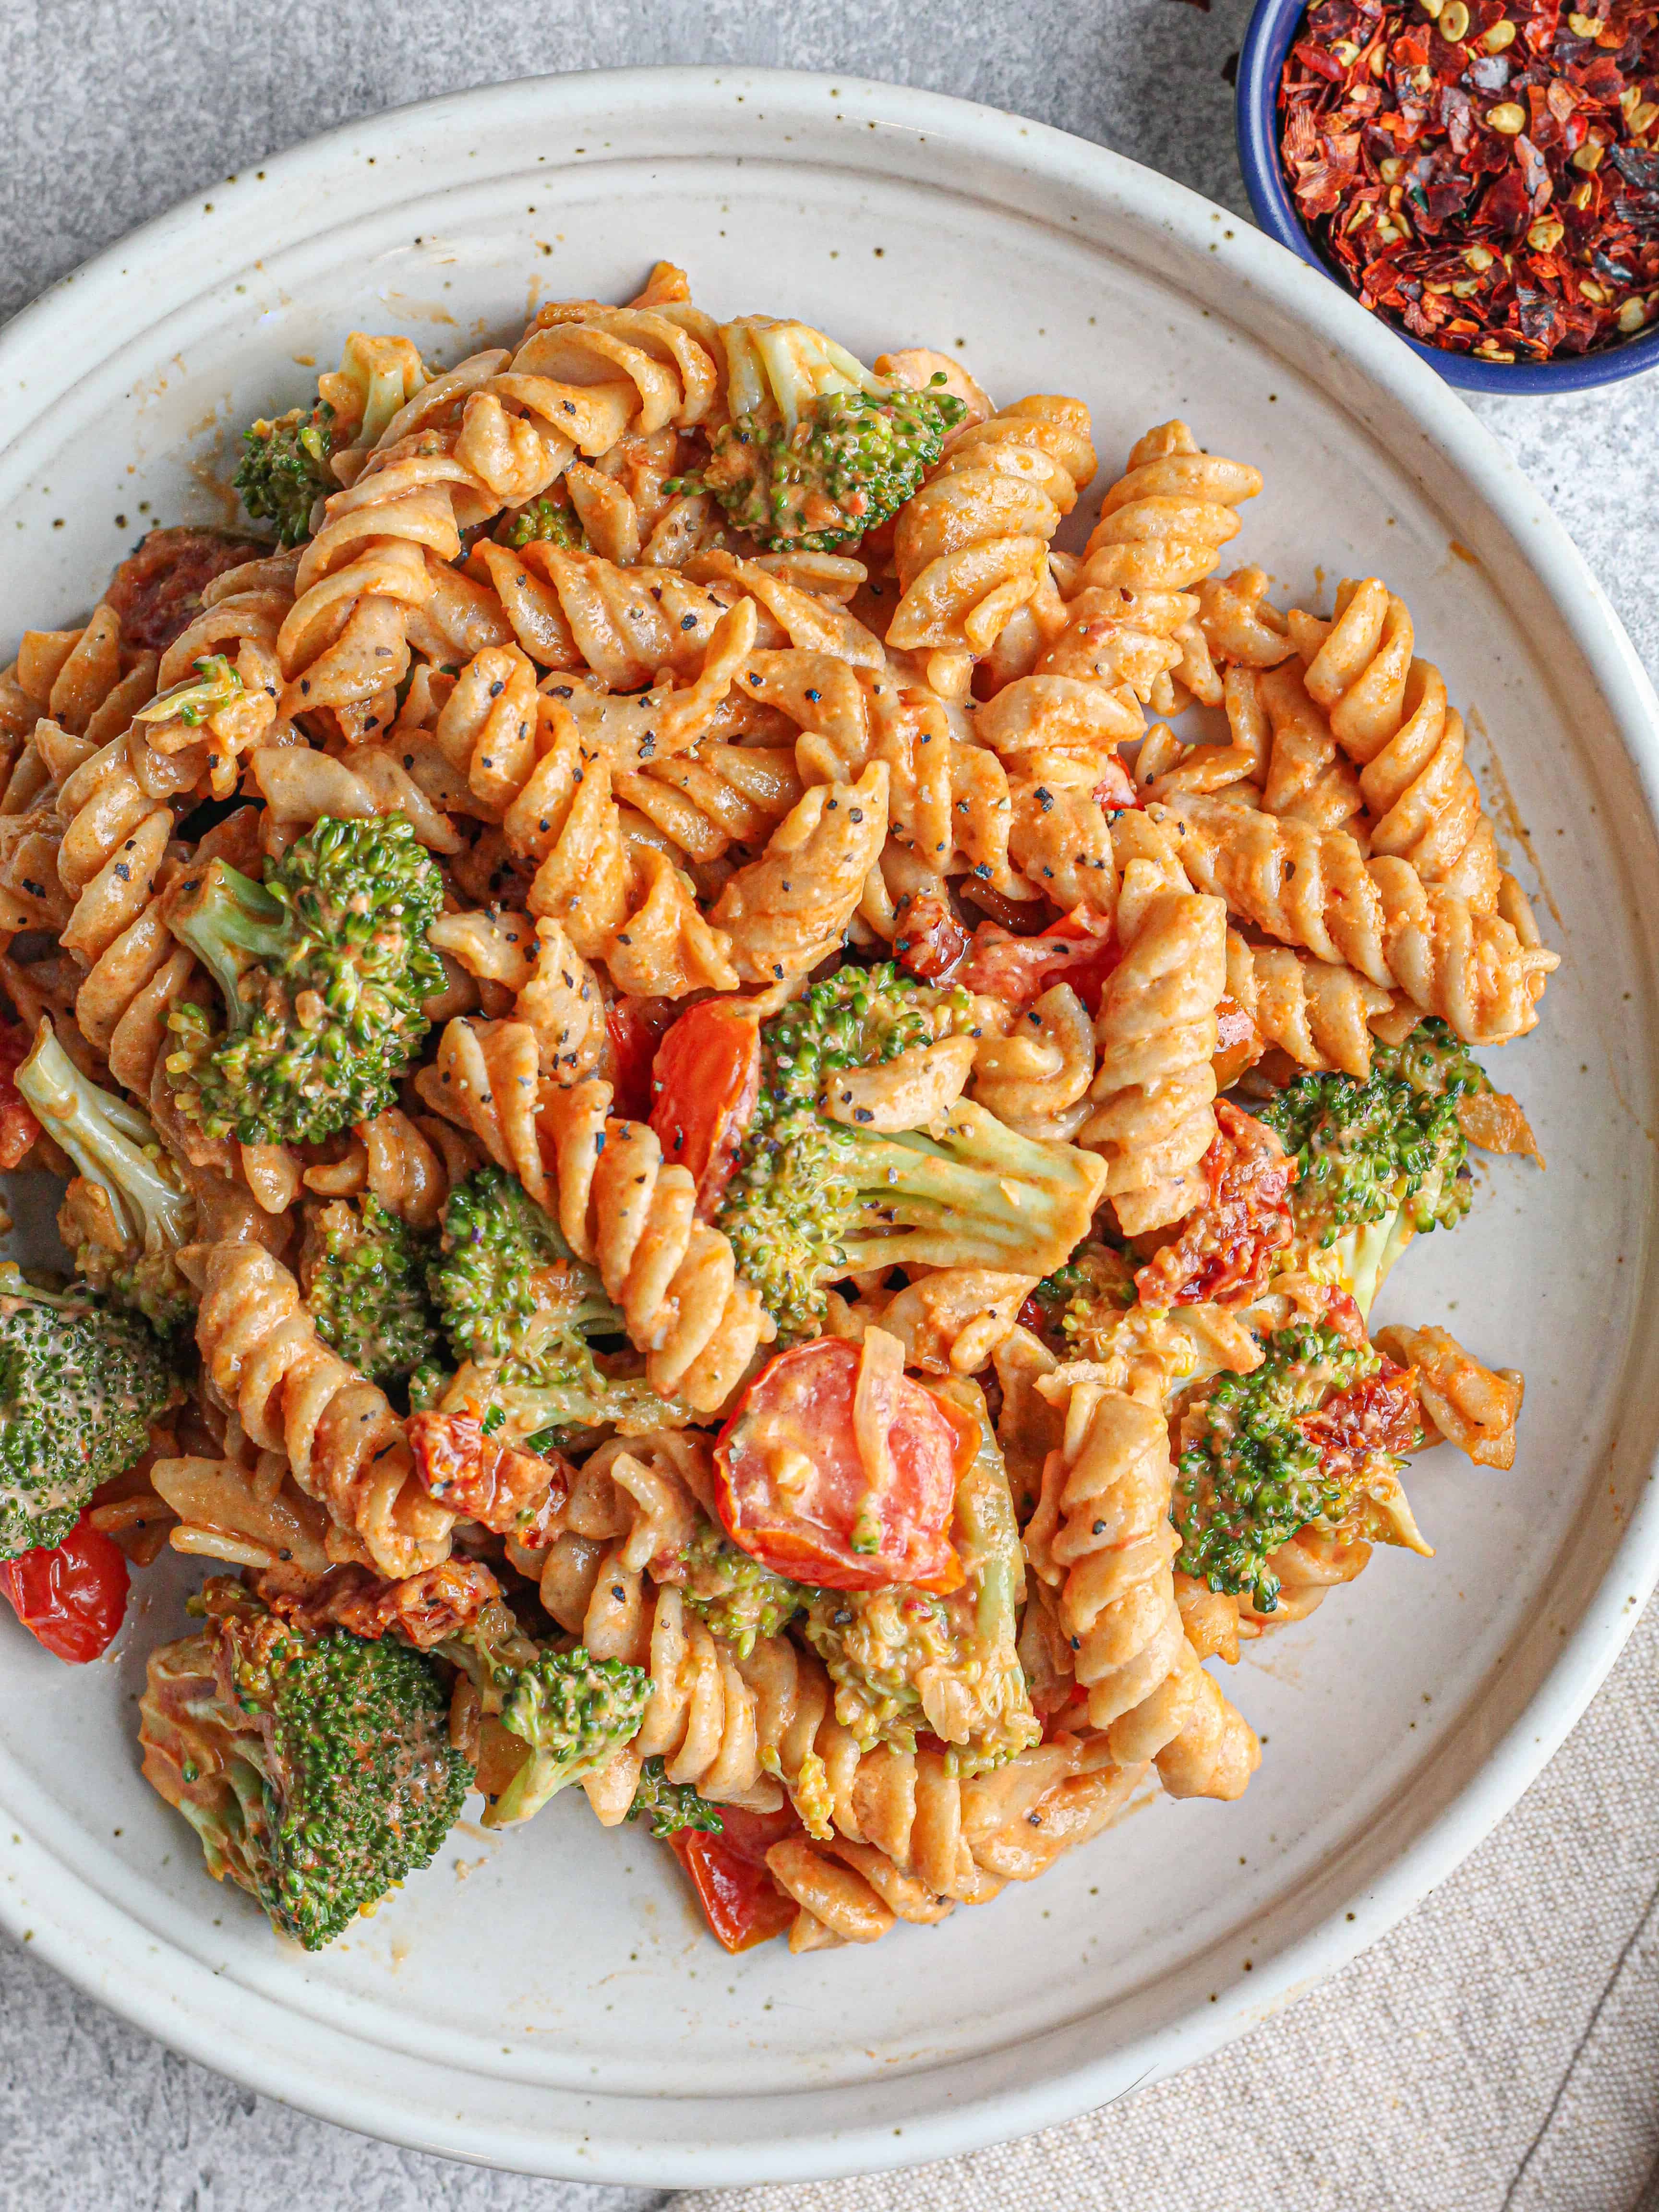 Creamy Tomato Pasta with Broccoli - Munchmeals by Janet